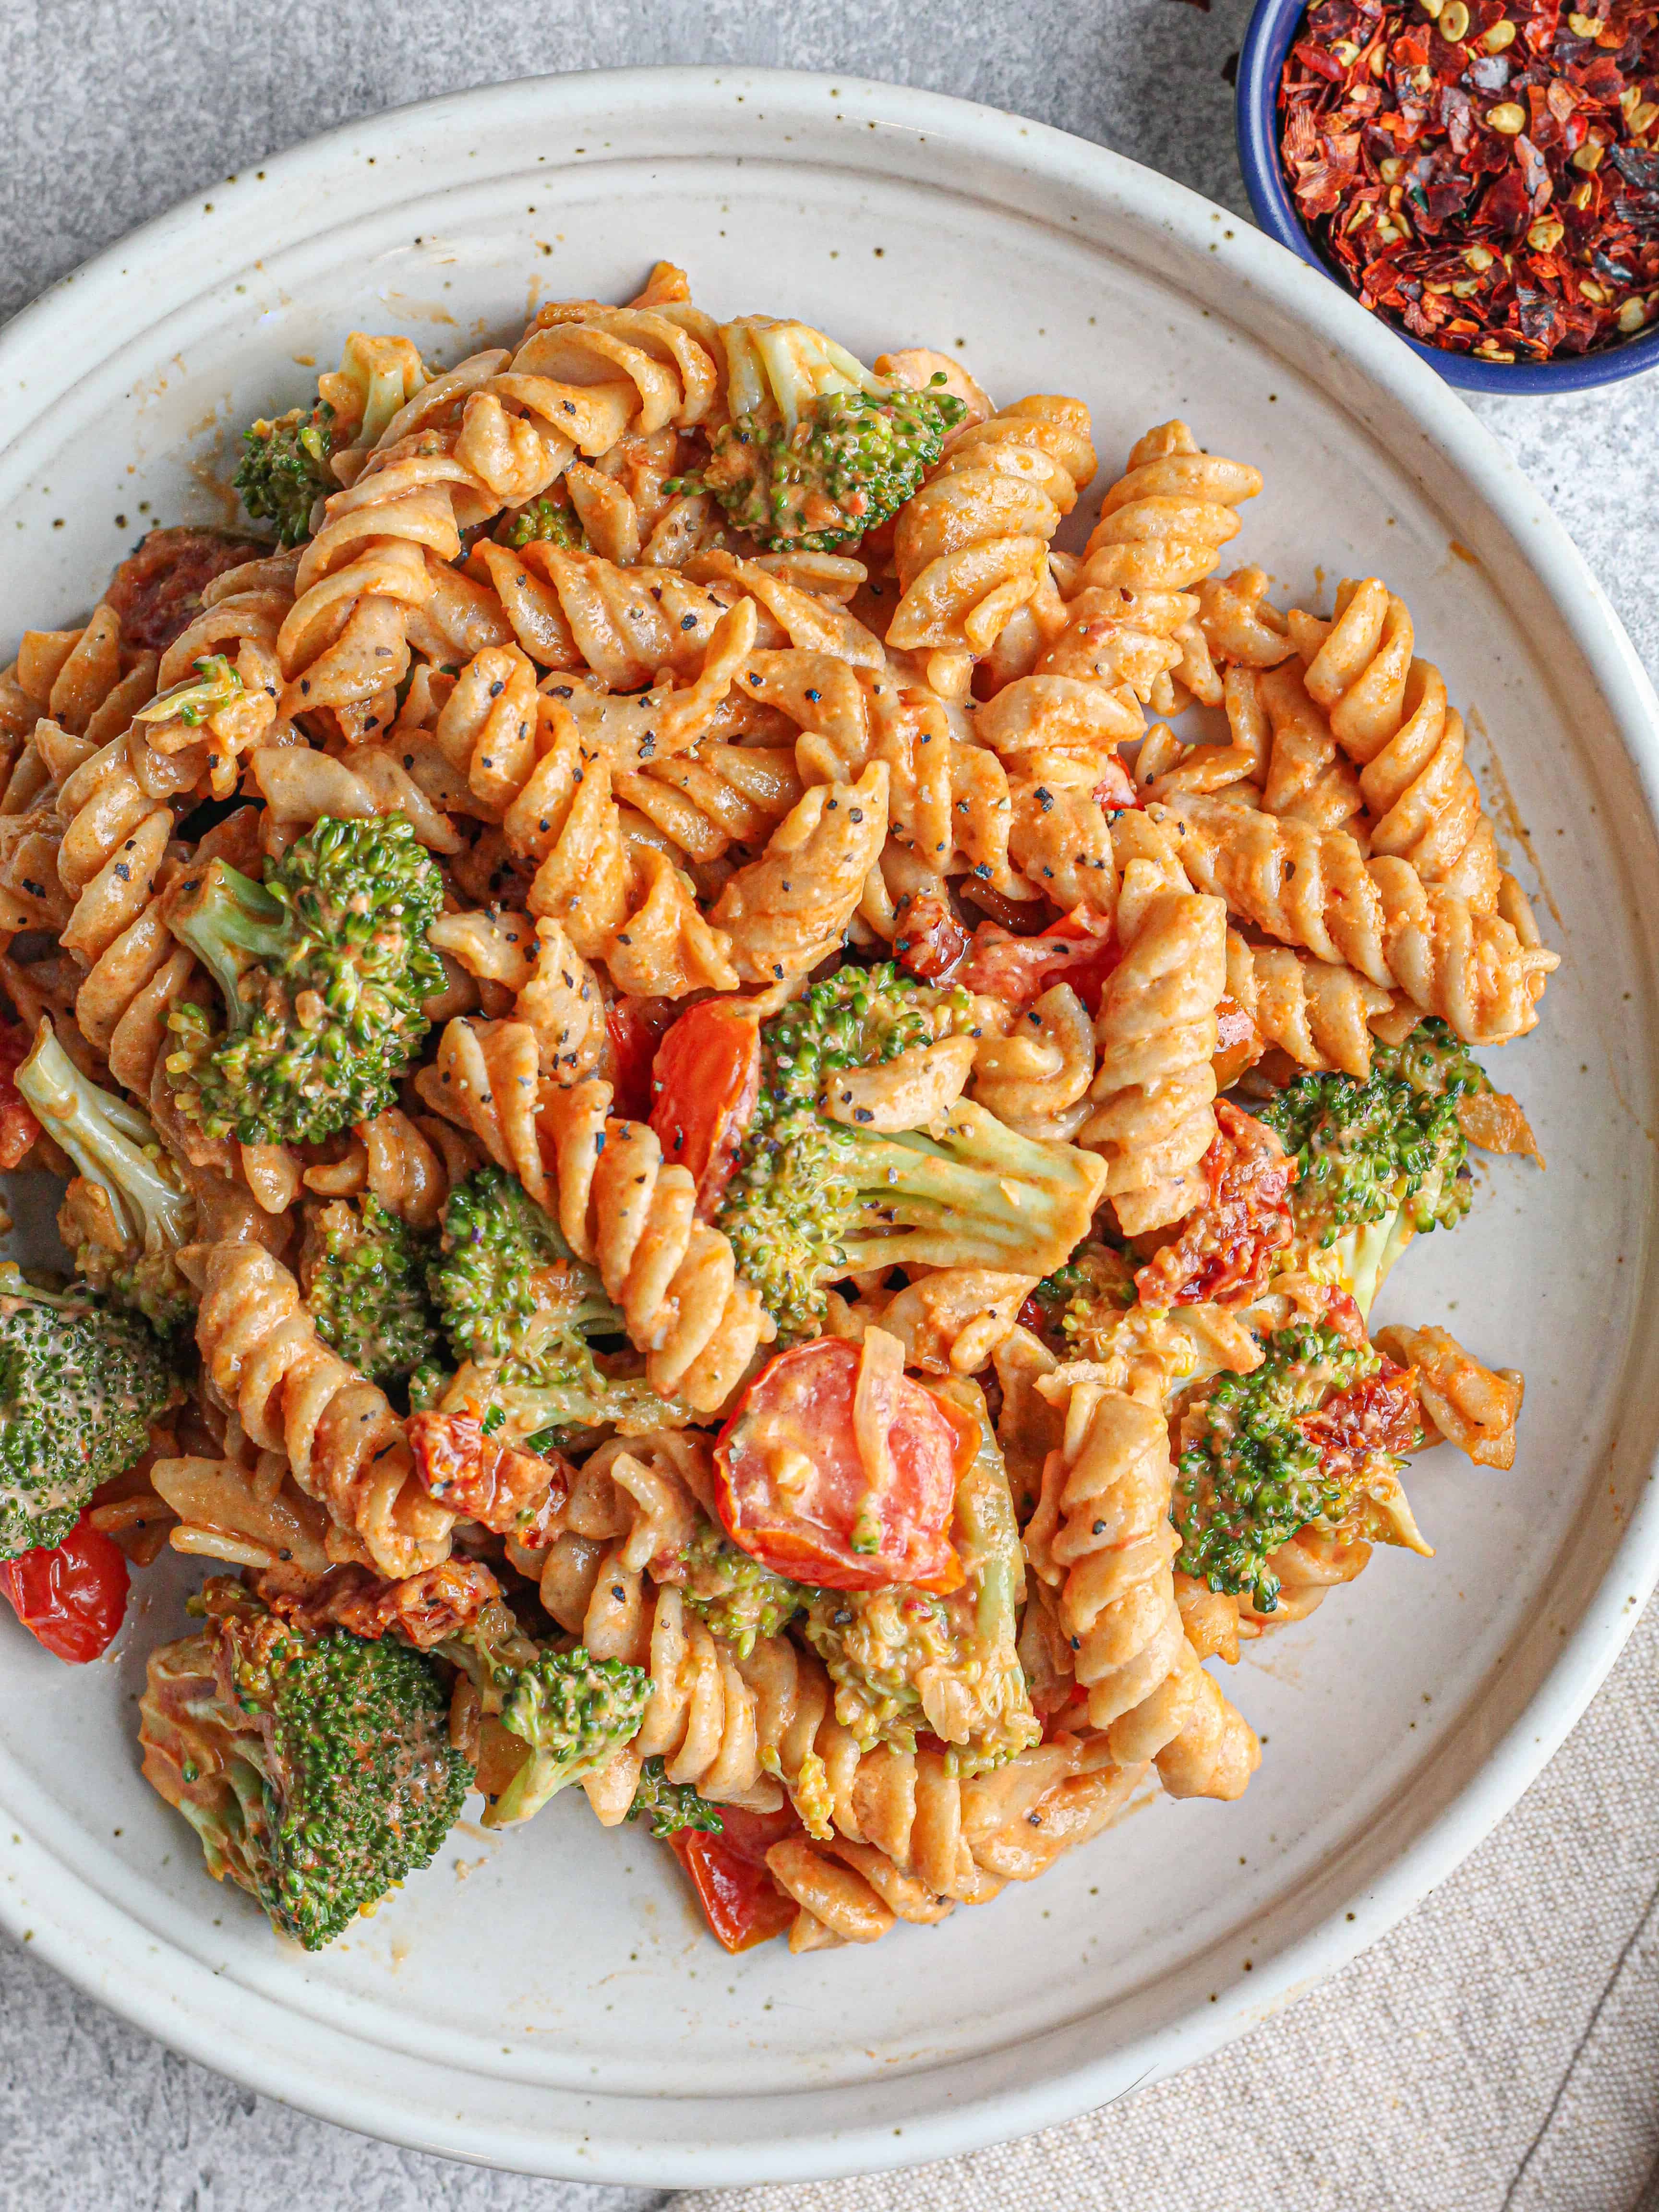 Creamy Tomato Pasta with Broccoli - Munchmeals by Janet